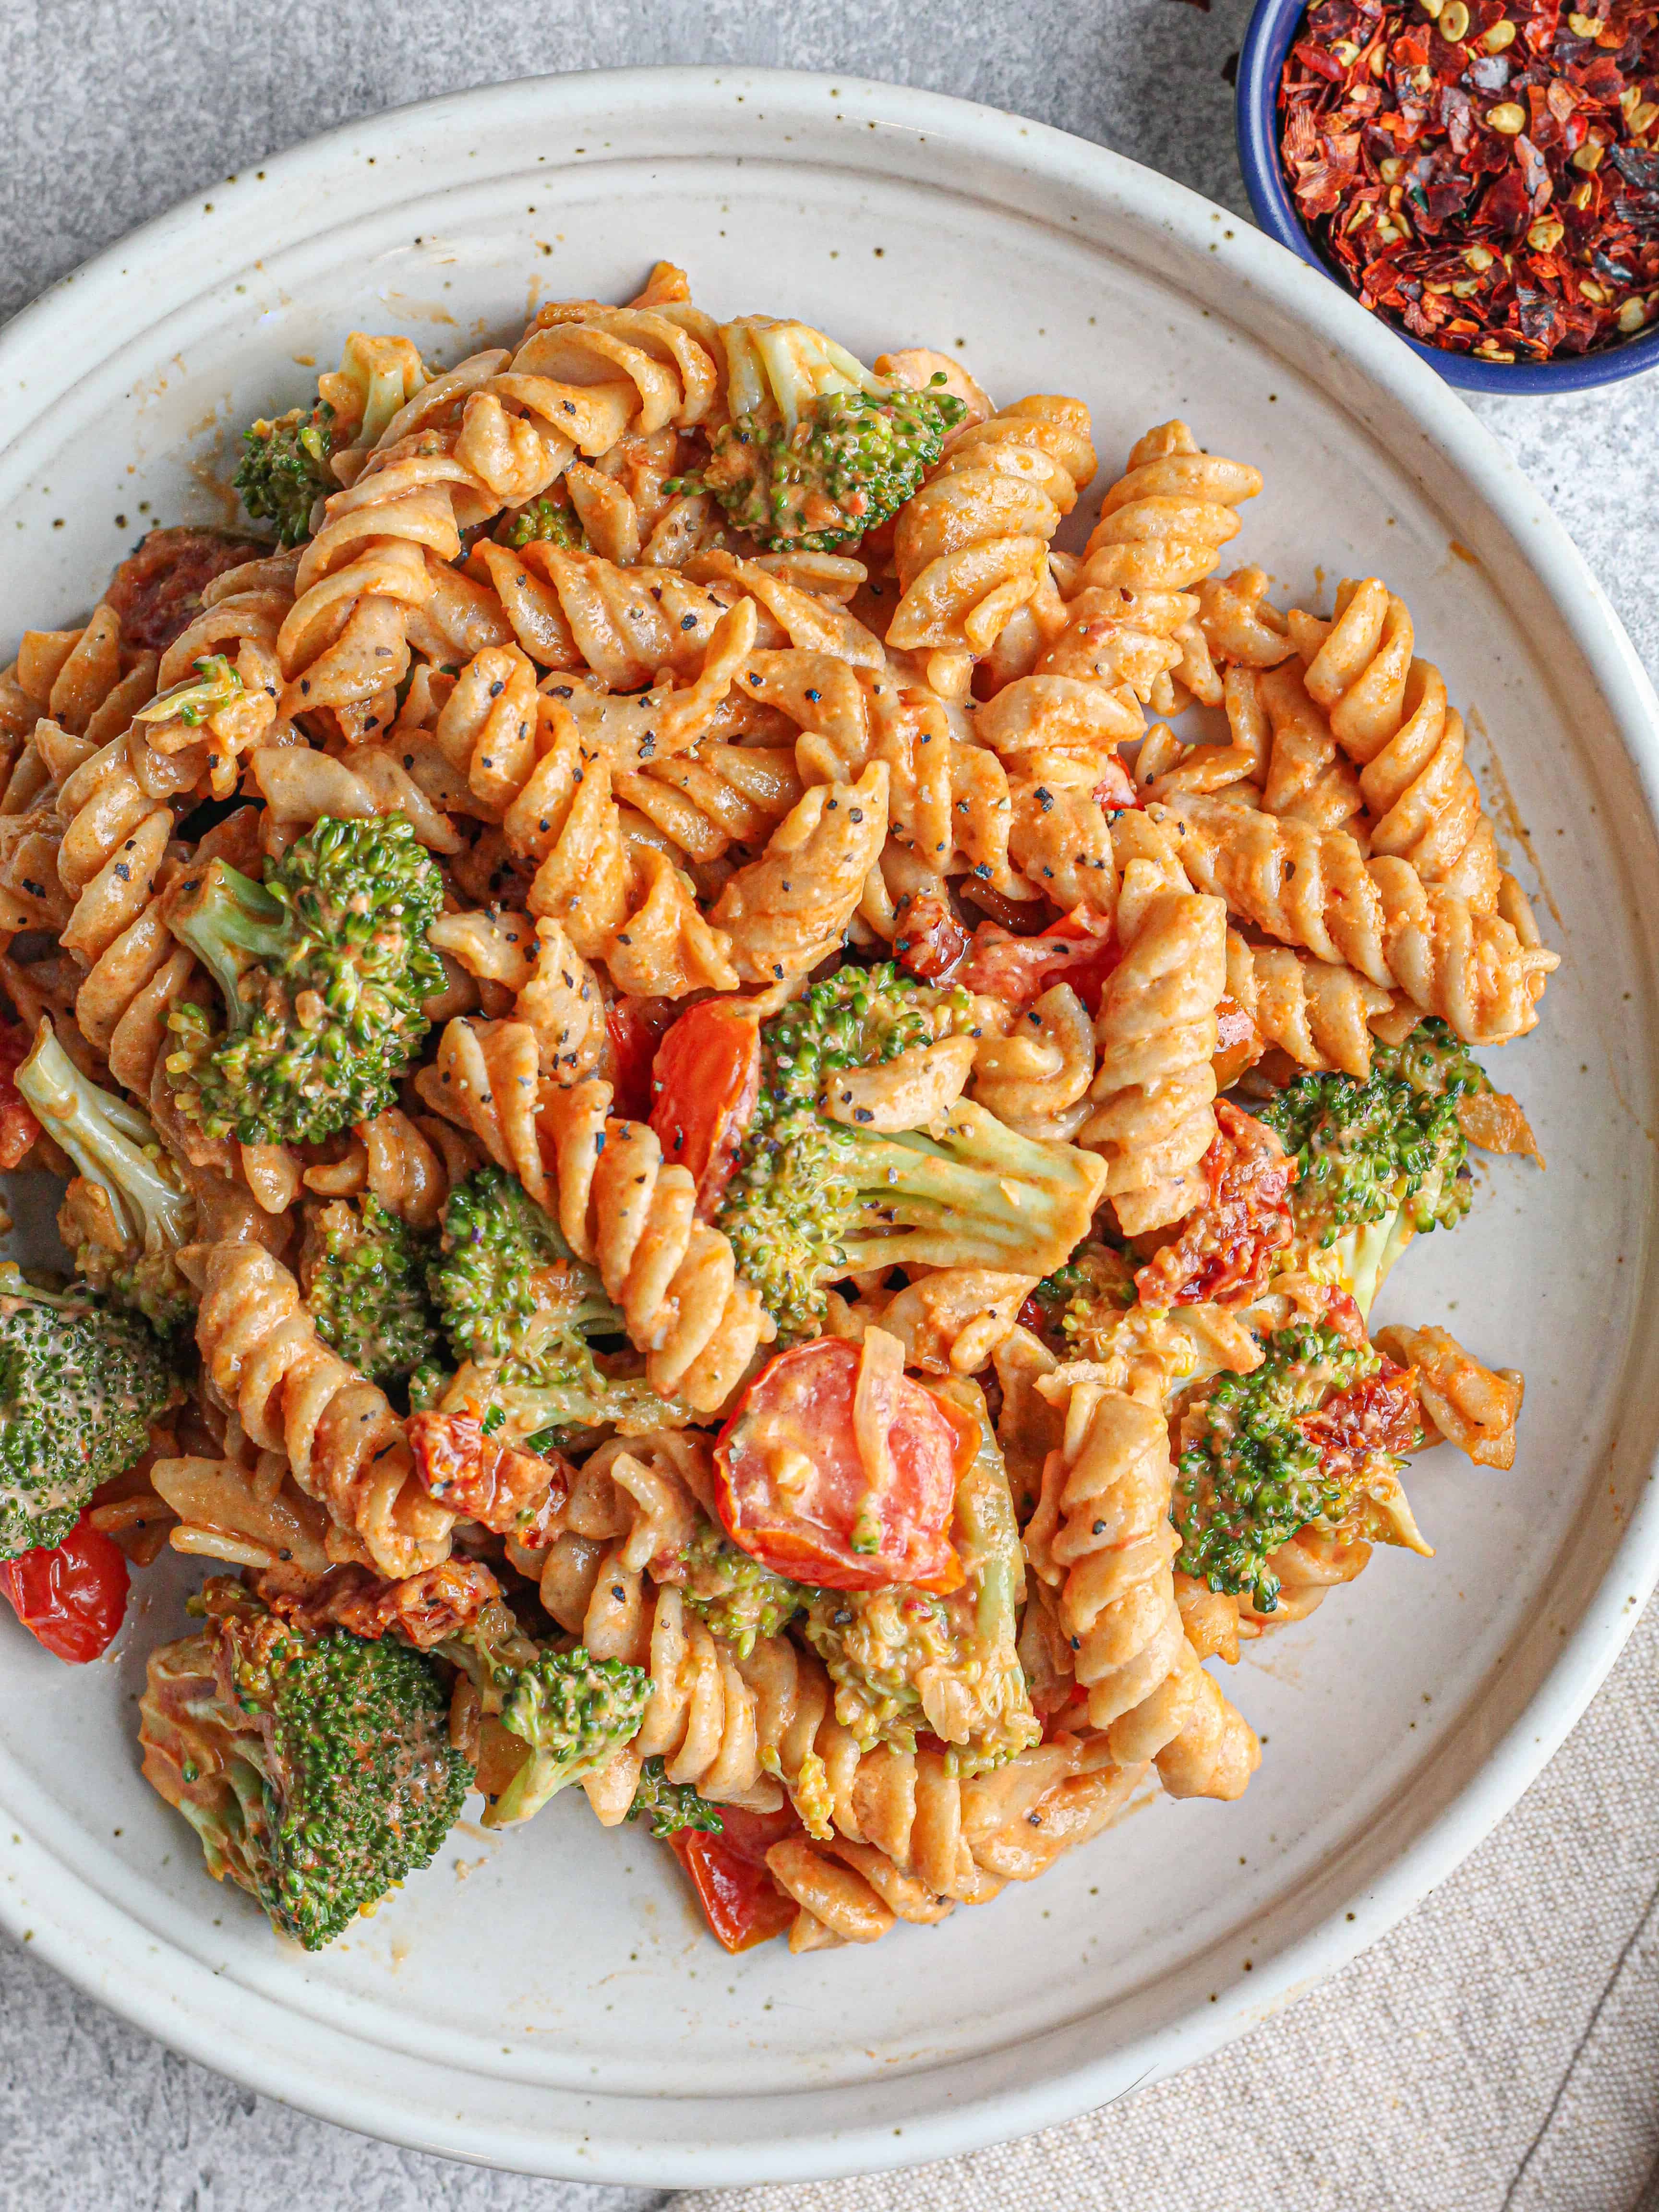 Creamy Tomato Pasta with Broccoli - Munchmeals by Janet